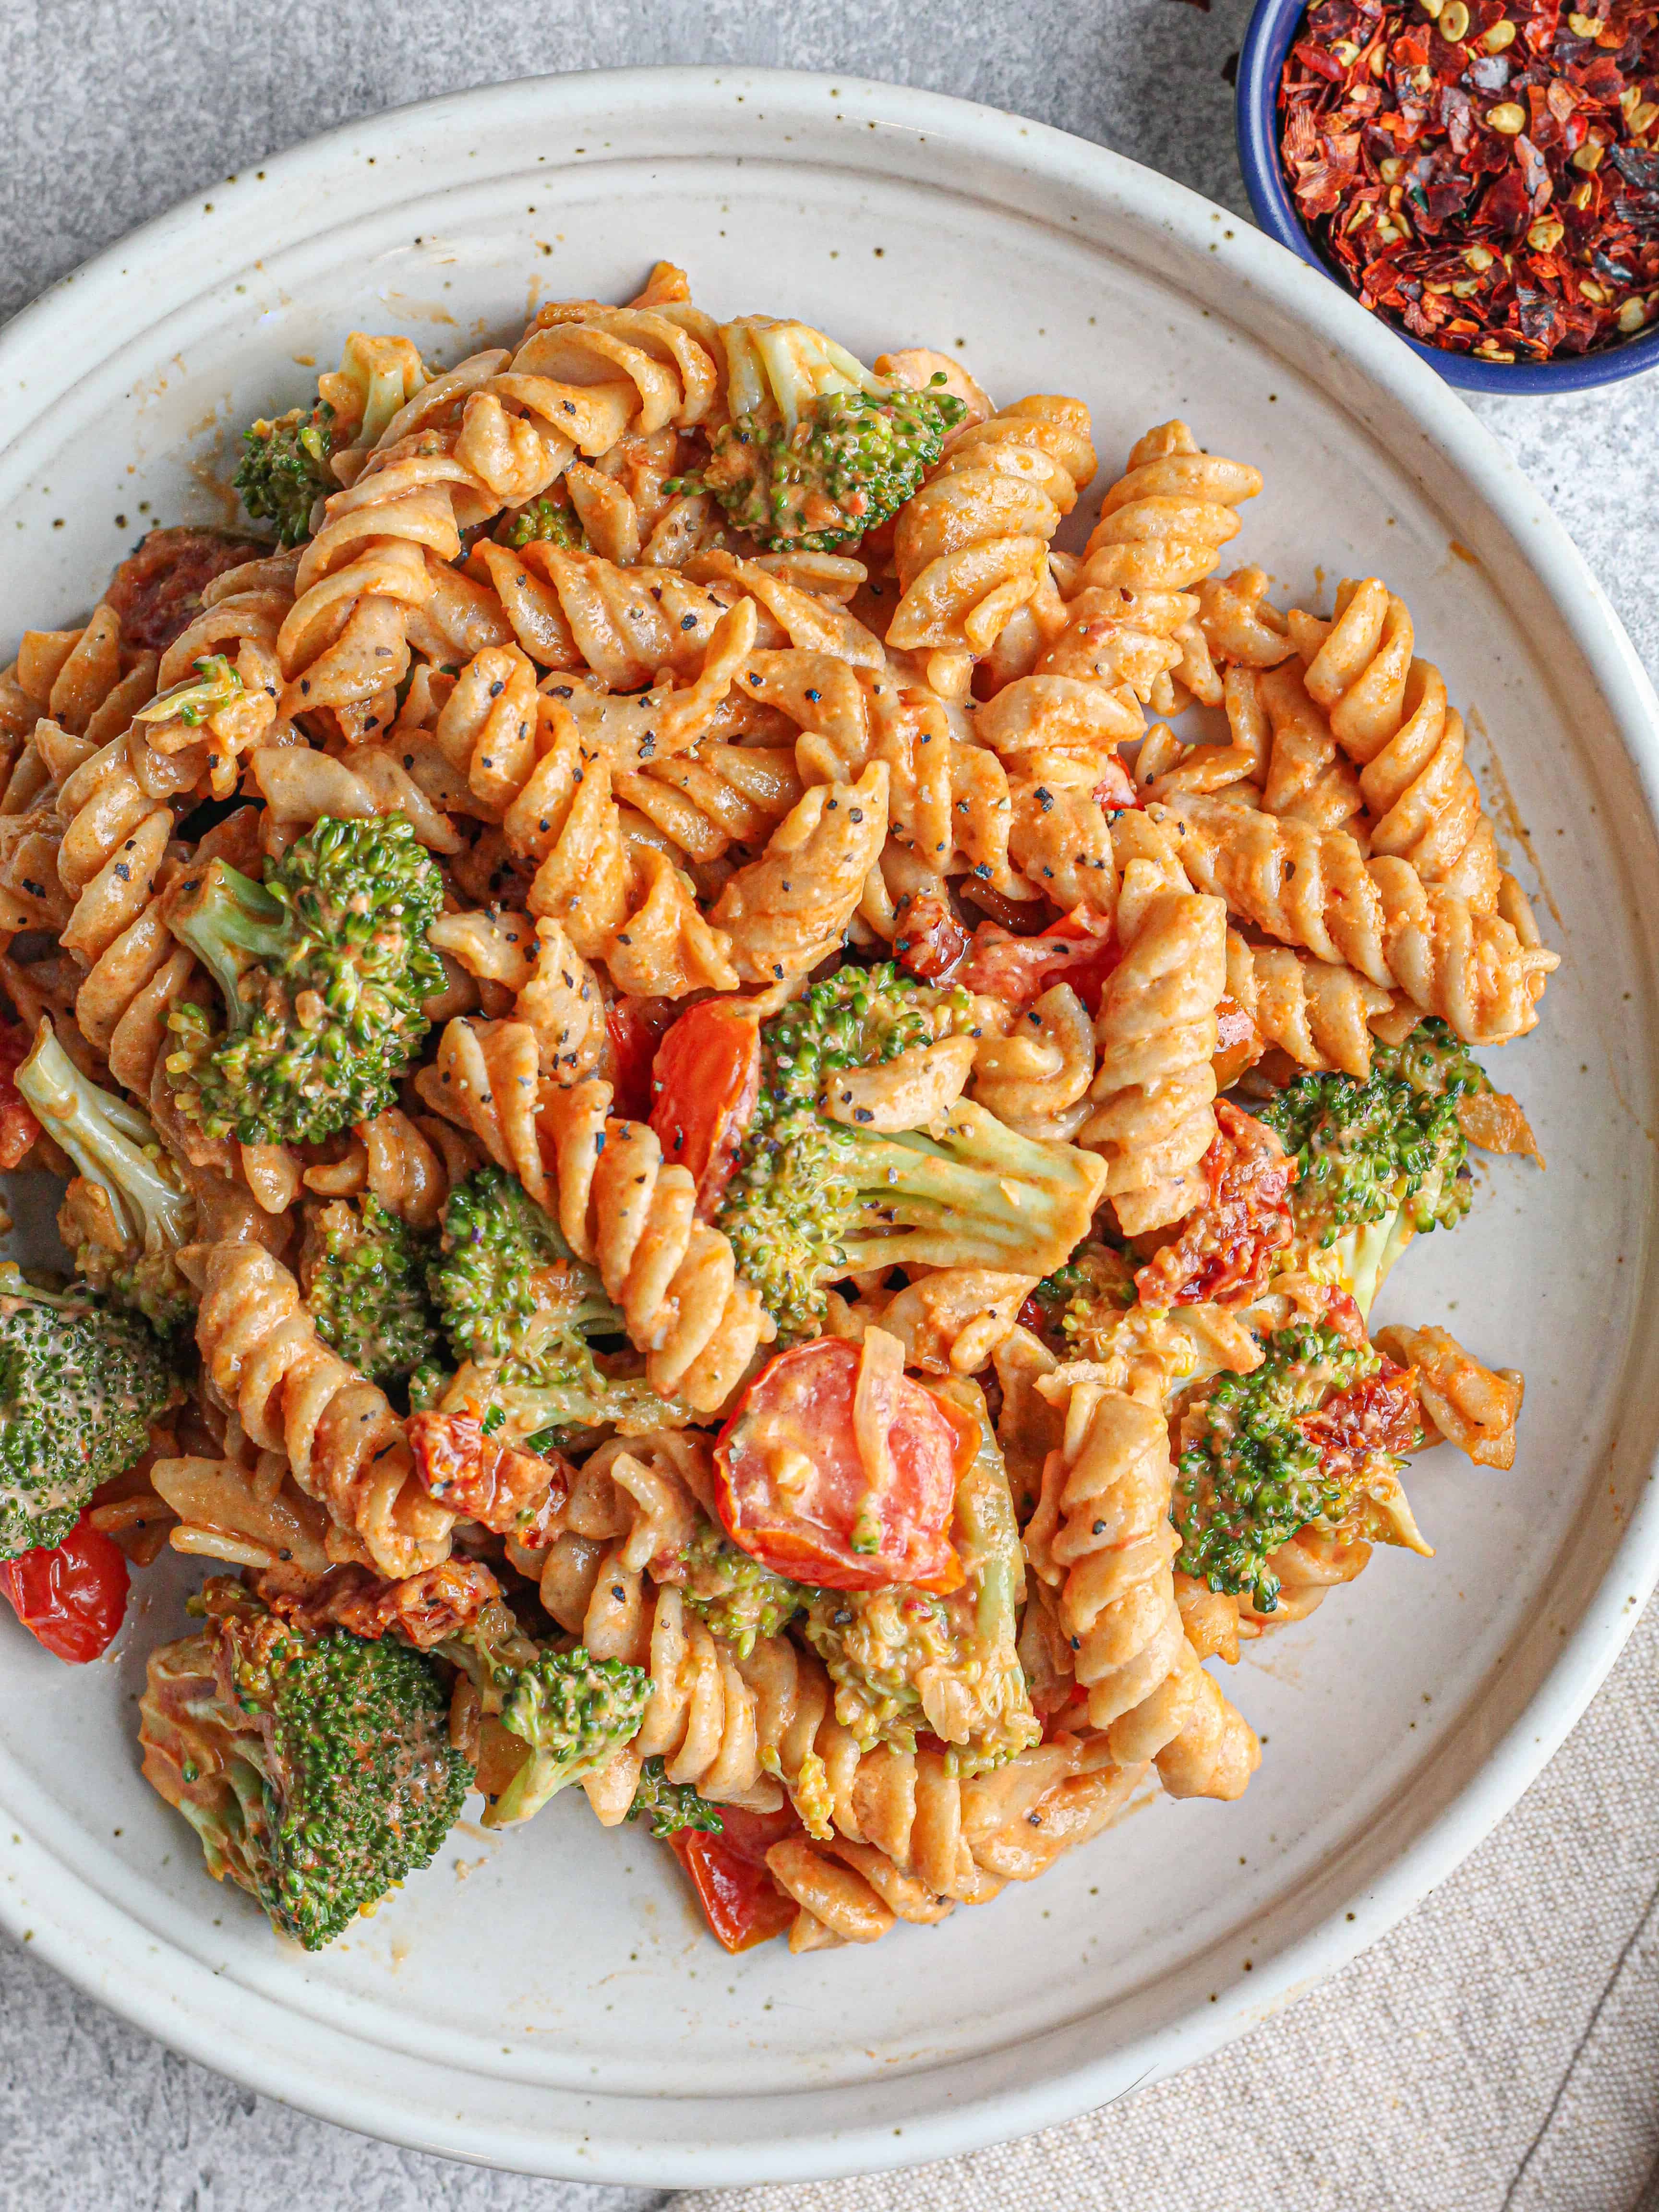 Creamy Tomato Pasta with Broccoli - Munchmeals by Janet